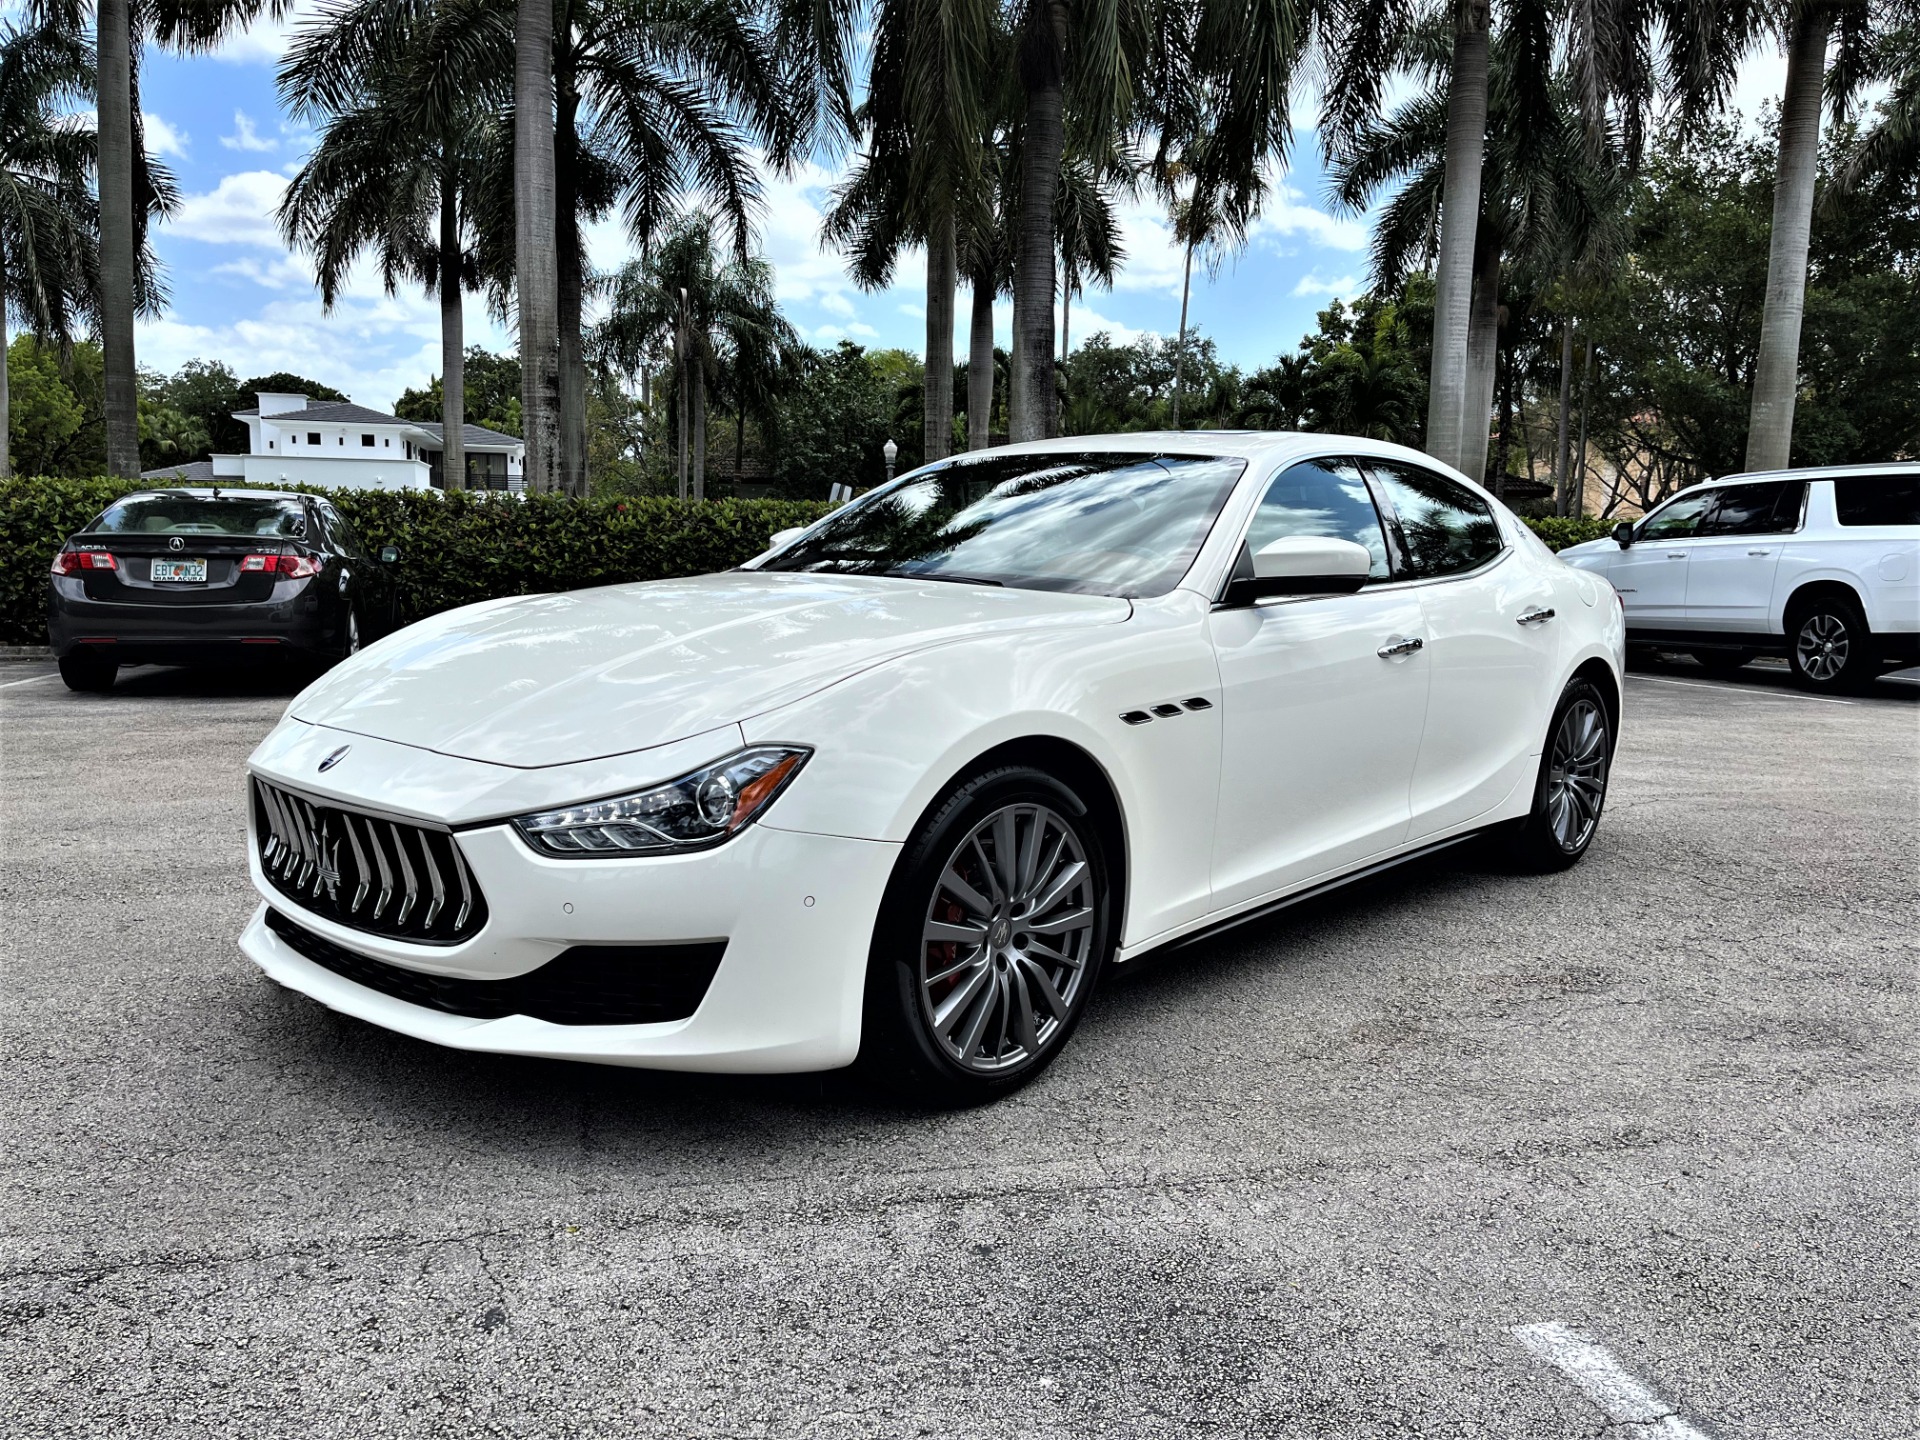 Used 2018 Maserati Ghibli SQ4 for sale Sold at The Gables Sports Cars in Miami FL 33146 3